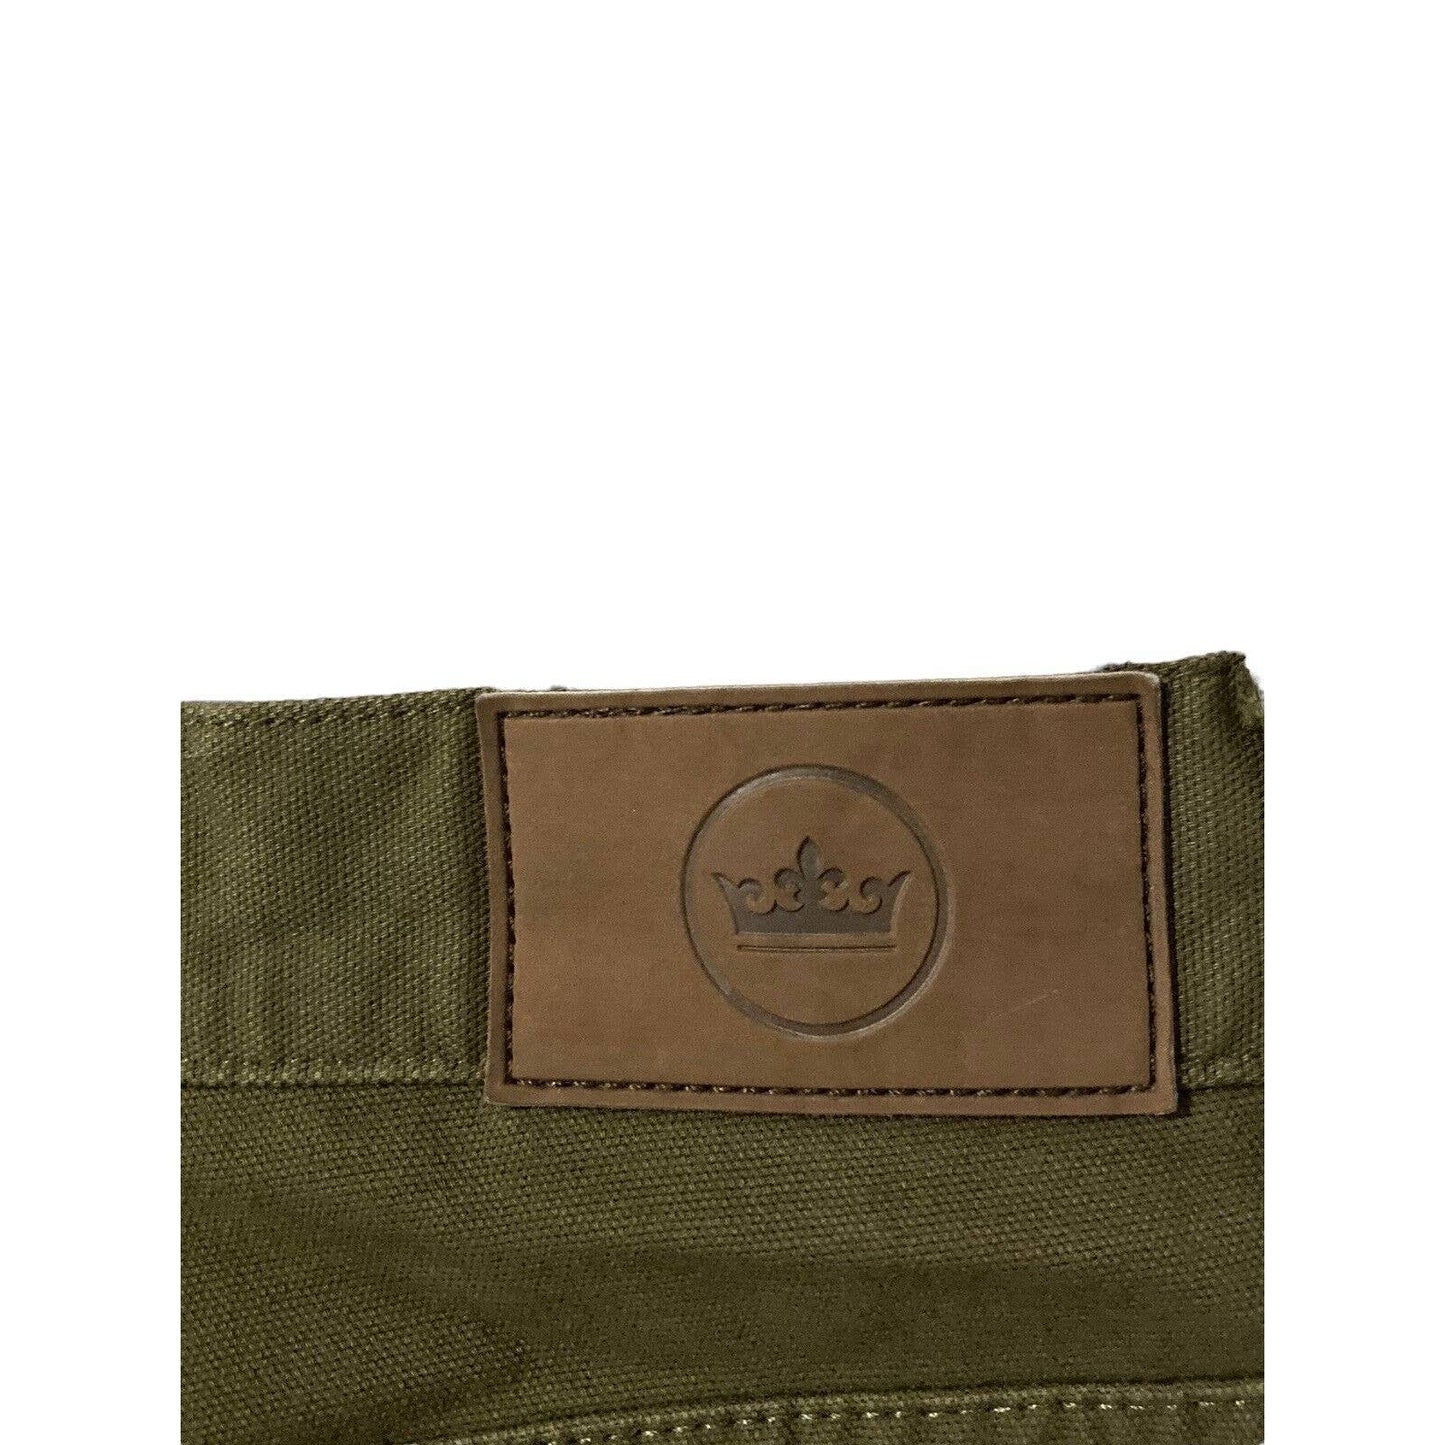 Peter Millar Crown Four-Way Stretch Canvas Five-Pocket Pants Green Size 38